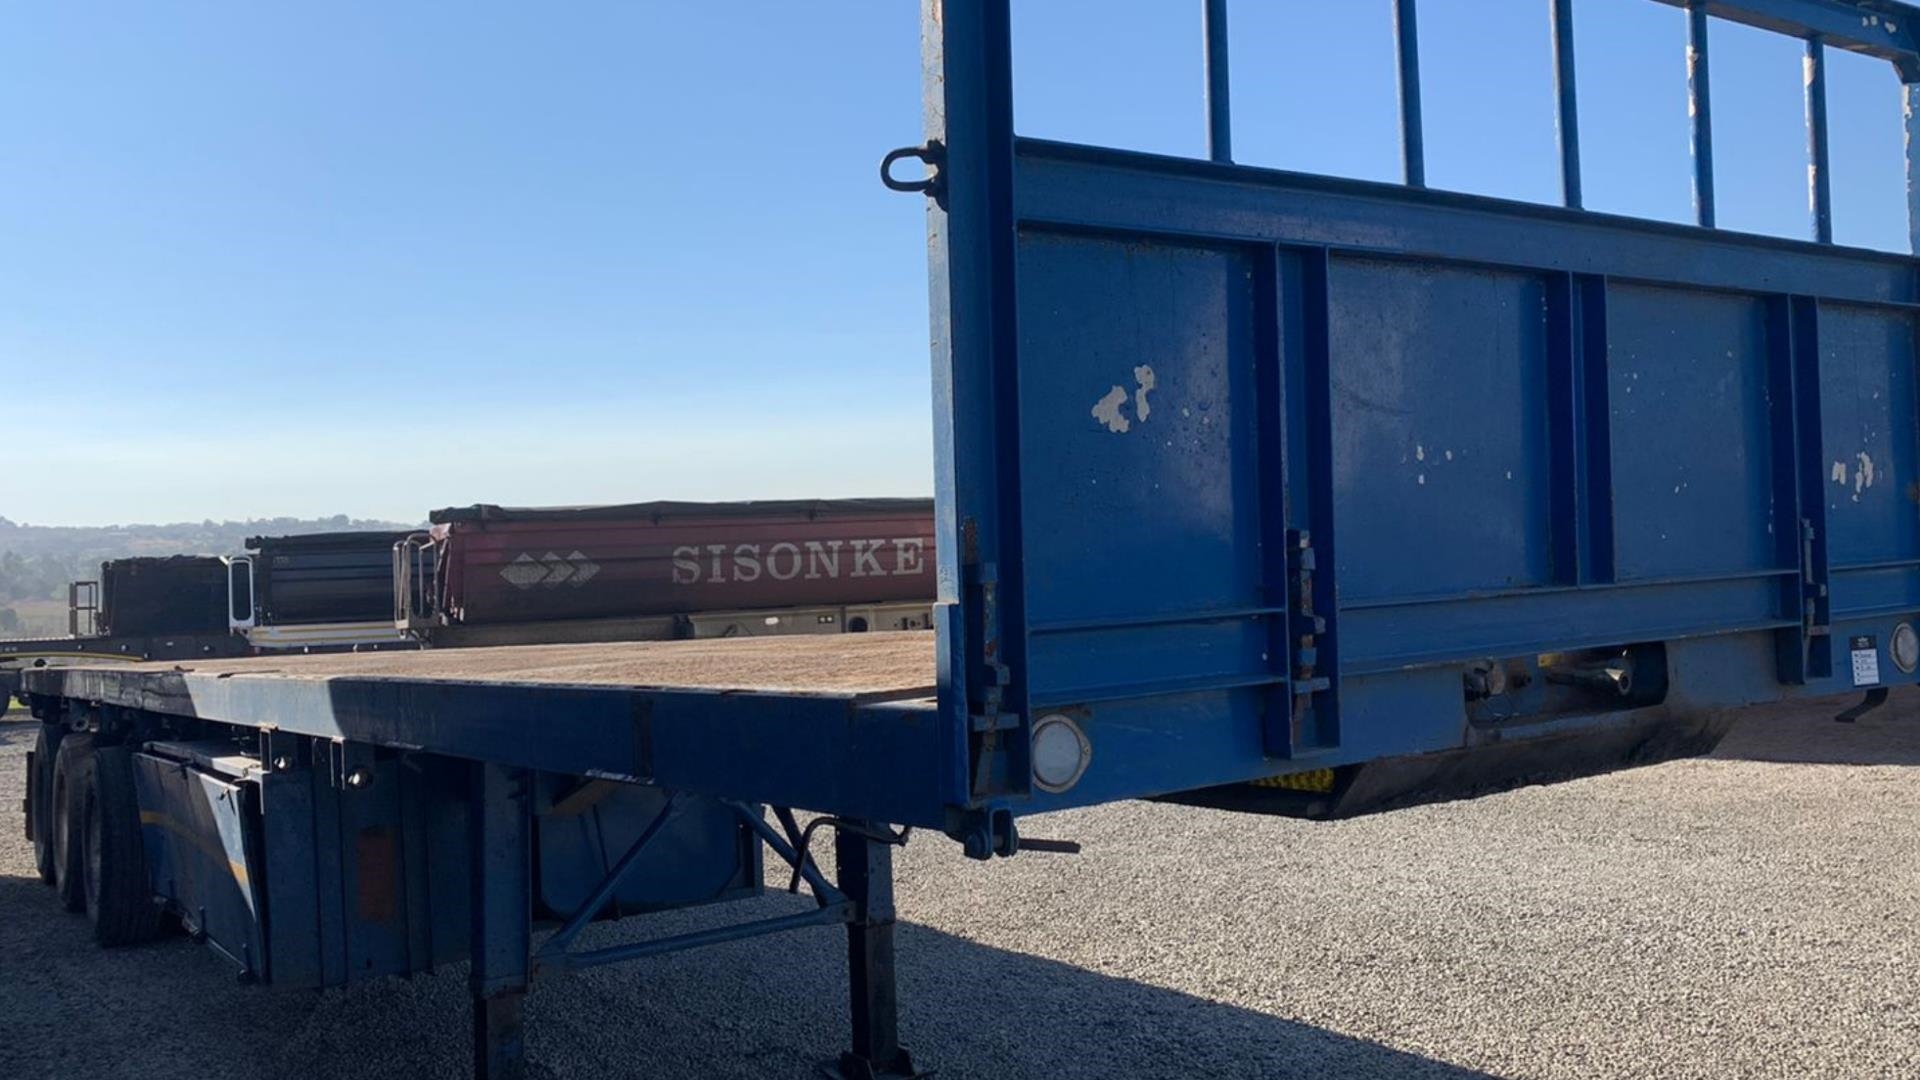 Paramount Trailers 2015 Paramount Tri Axle Trailer 2015 for sale by Truck and Plant Connection | Truck & Trailer Marketplaces